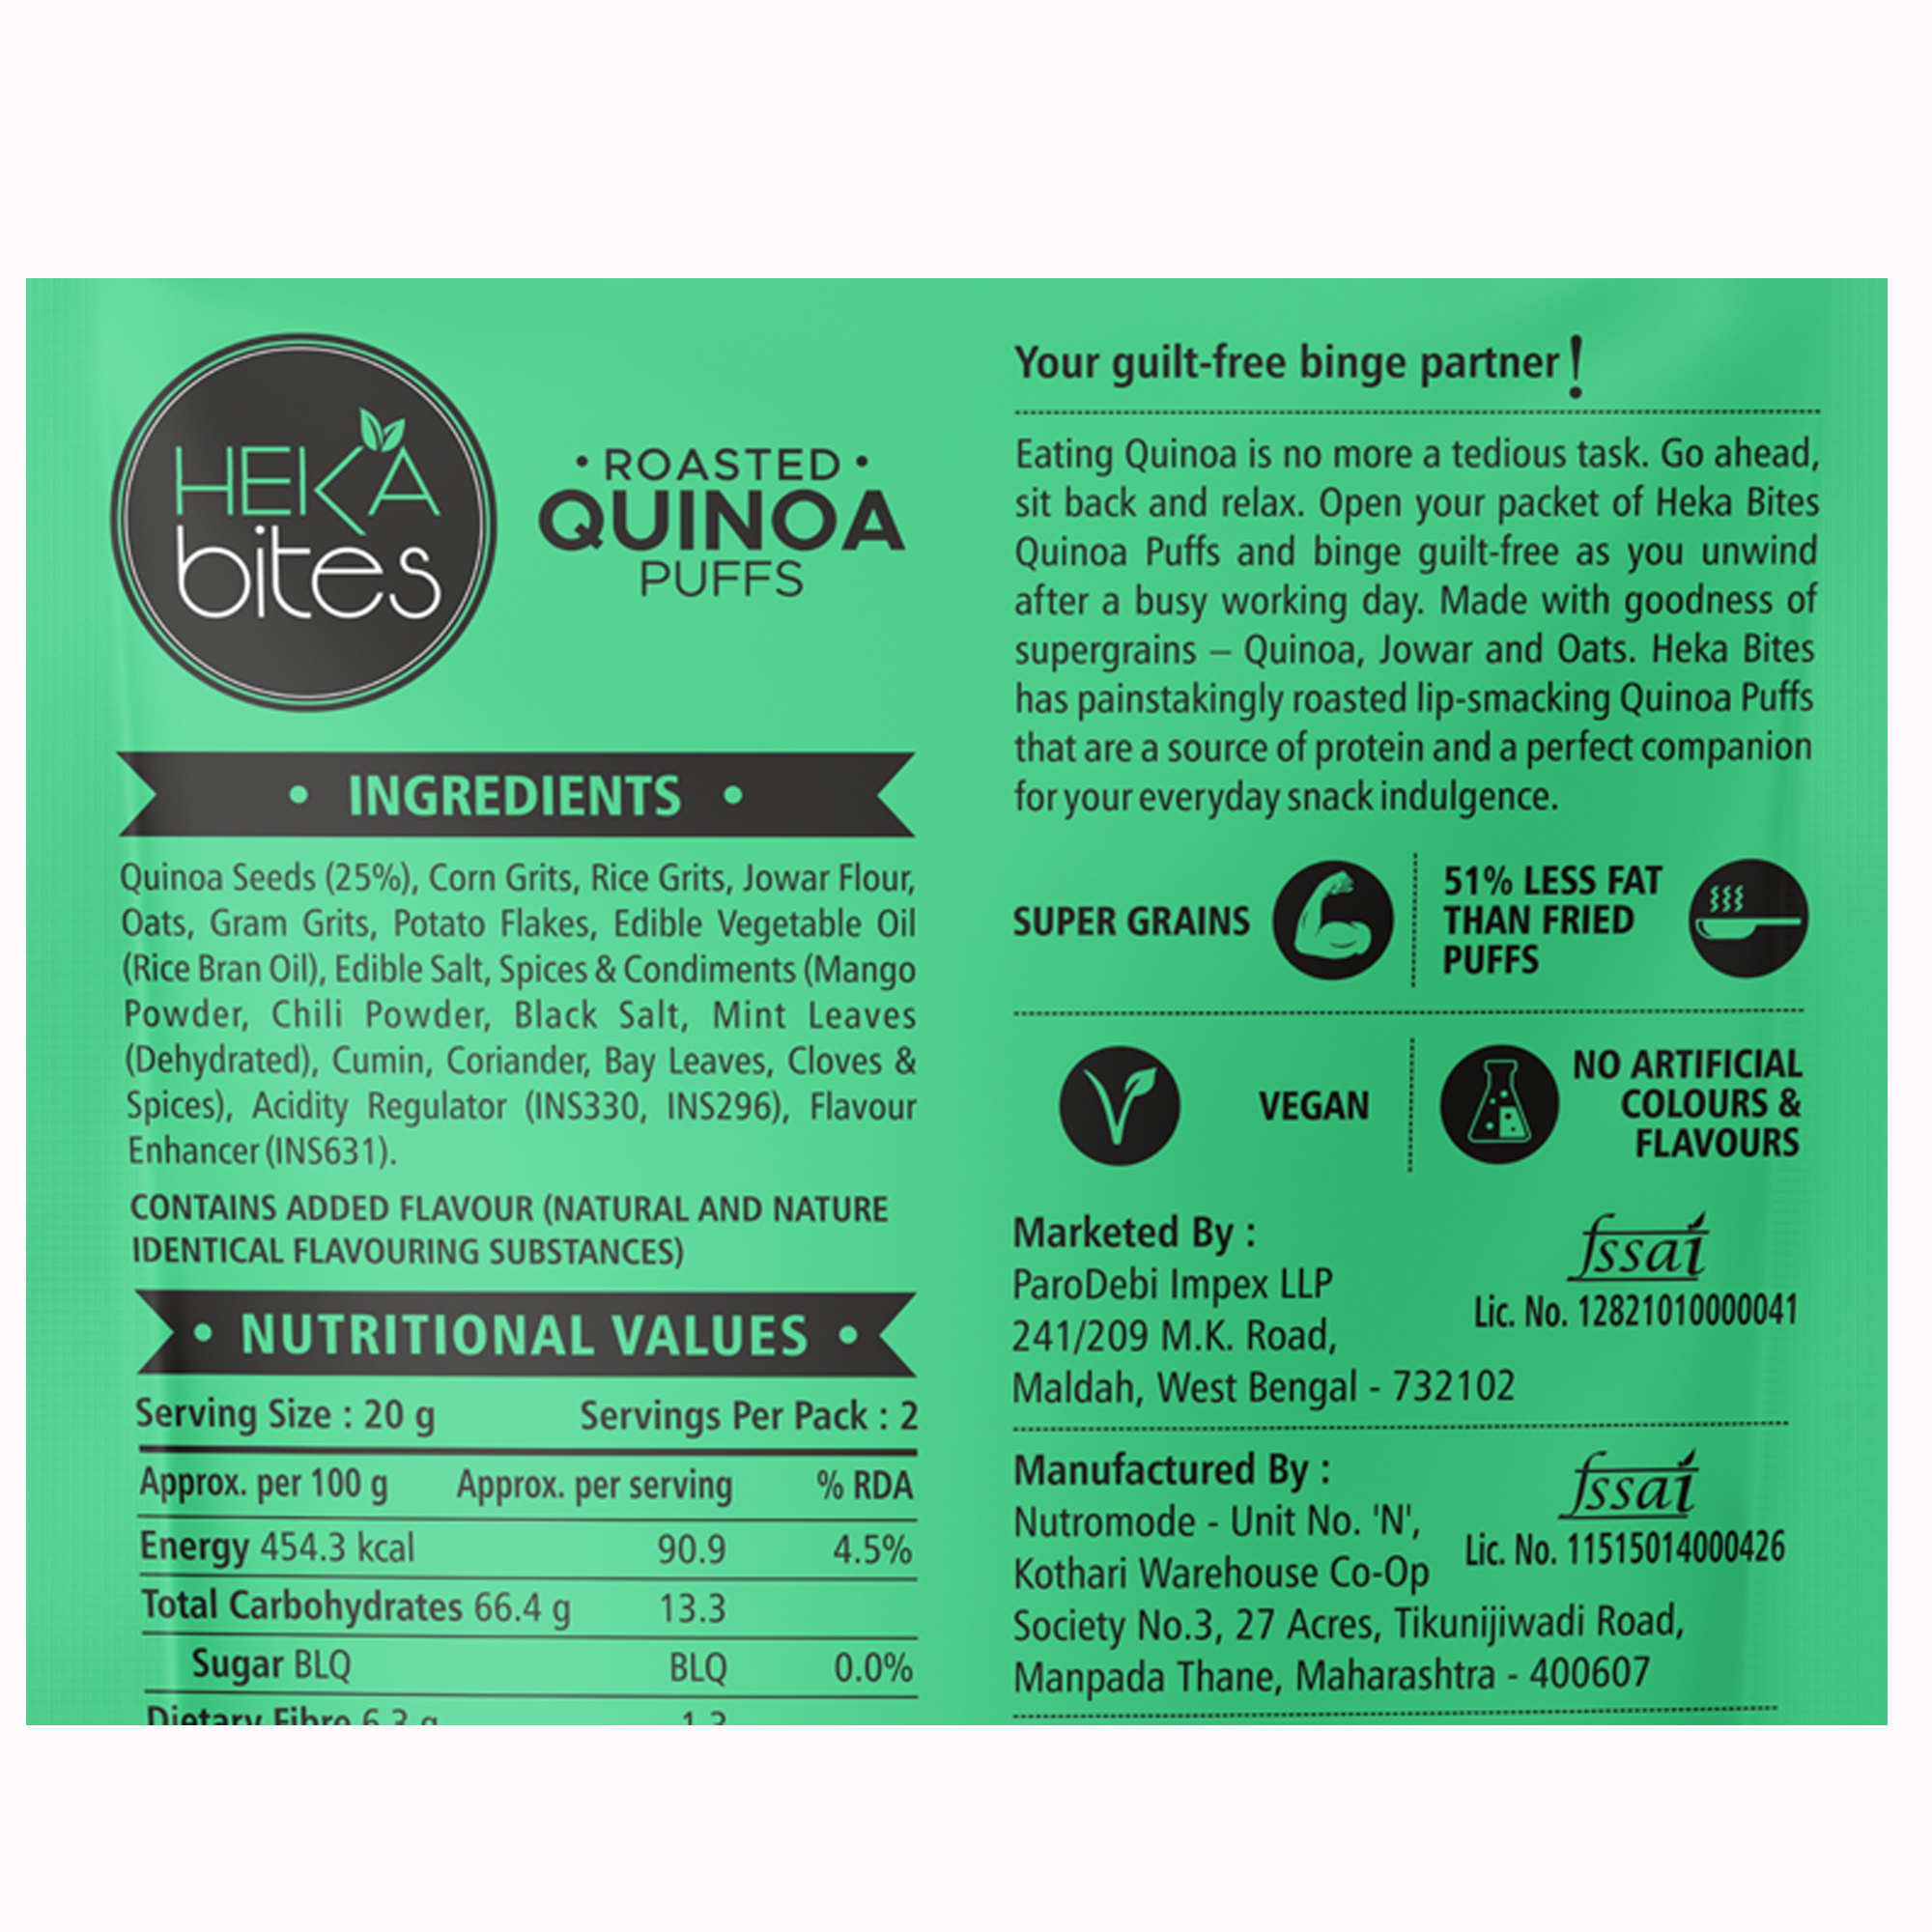 Quinoa Puffs - Indian Chaat (2 Pack of 100 grams)